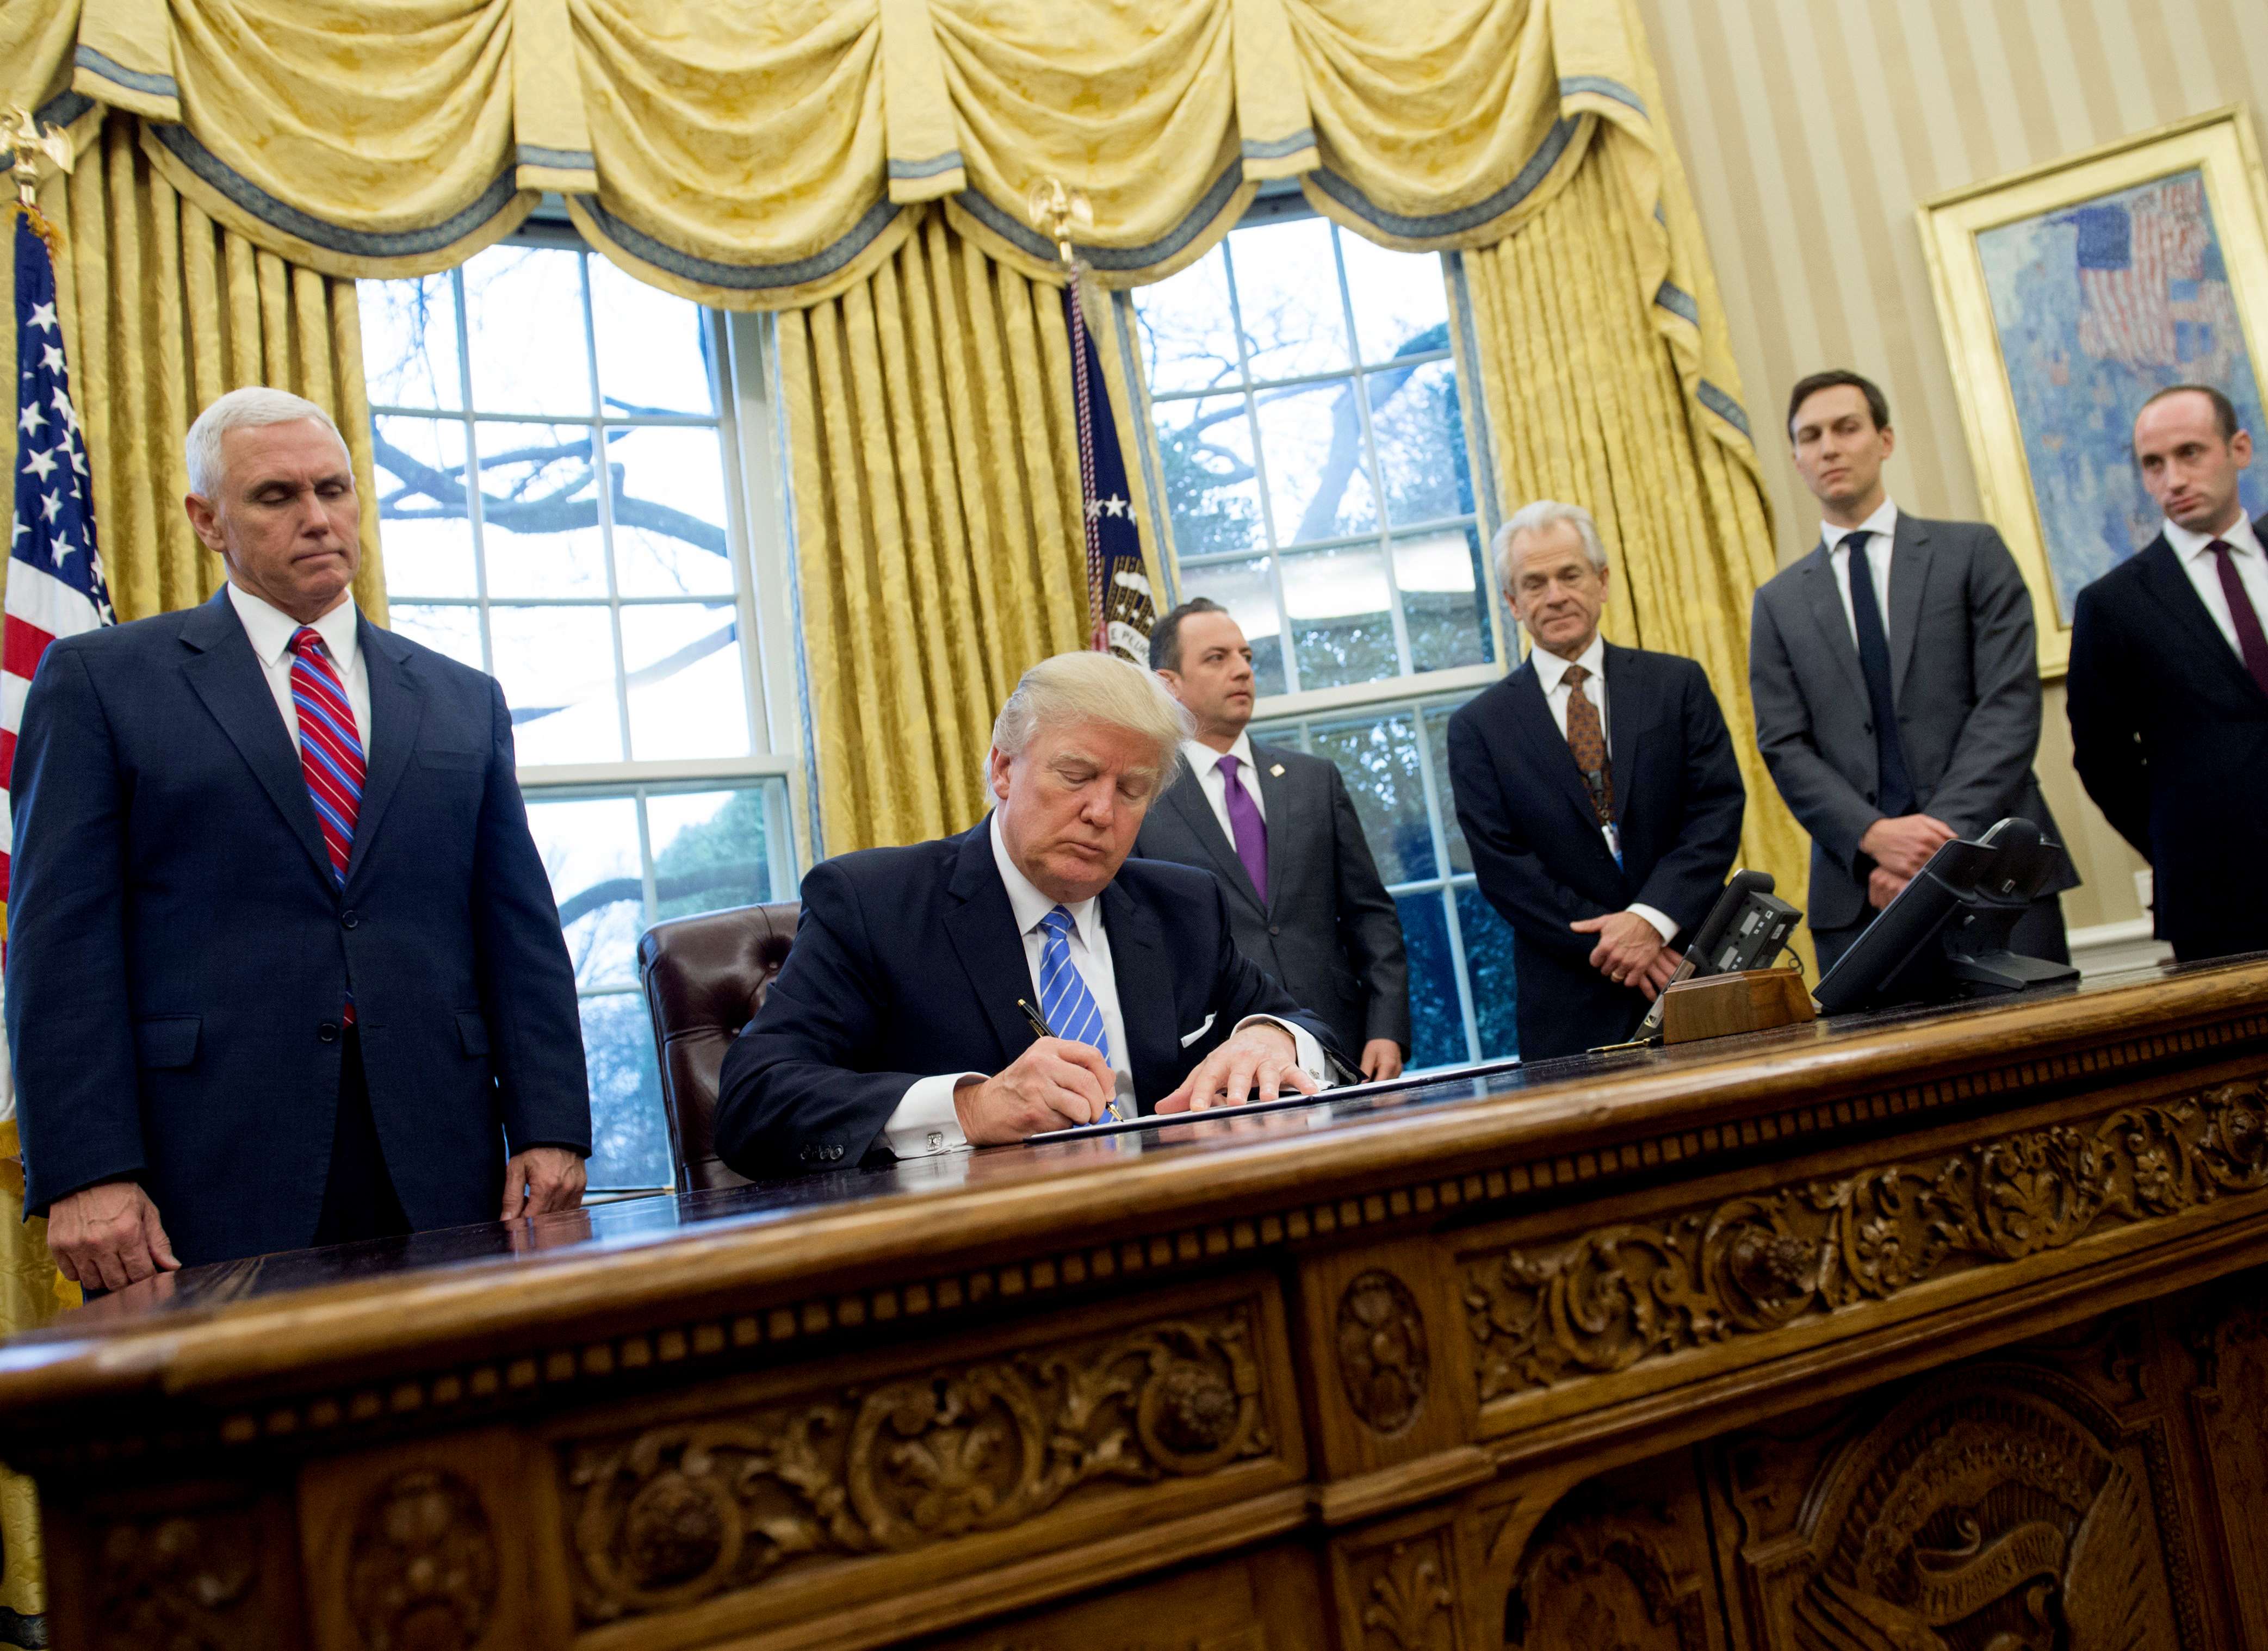 US President Donald Trump signs an executive order watched by,standing, from left, Vice President Mike Pence, Chief of Staff Reince Priebus, National Trade Council Advisor Peter Navarro, Senior Advisor Jared Kushner and Senior Policy Advisor Stephen Miller in the Oval Office on January 23. Photo: AFP